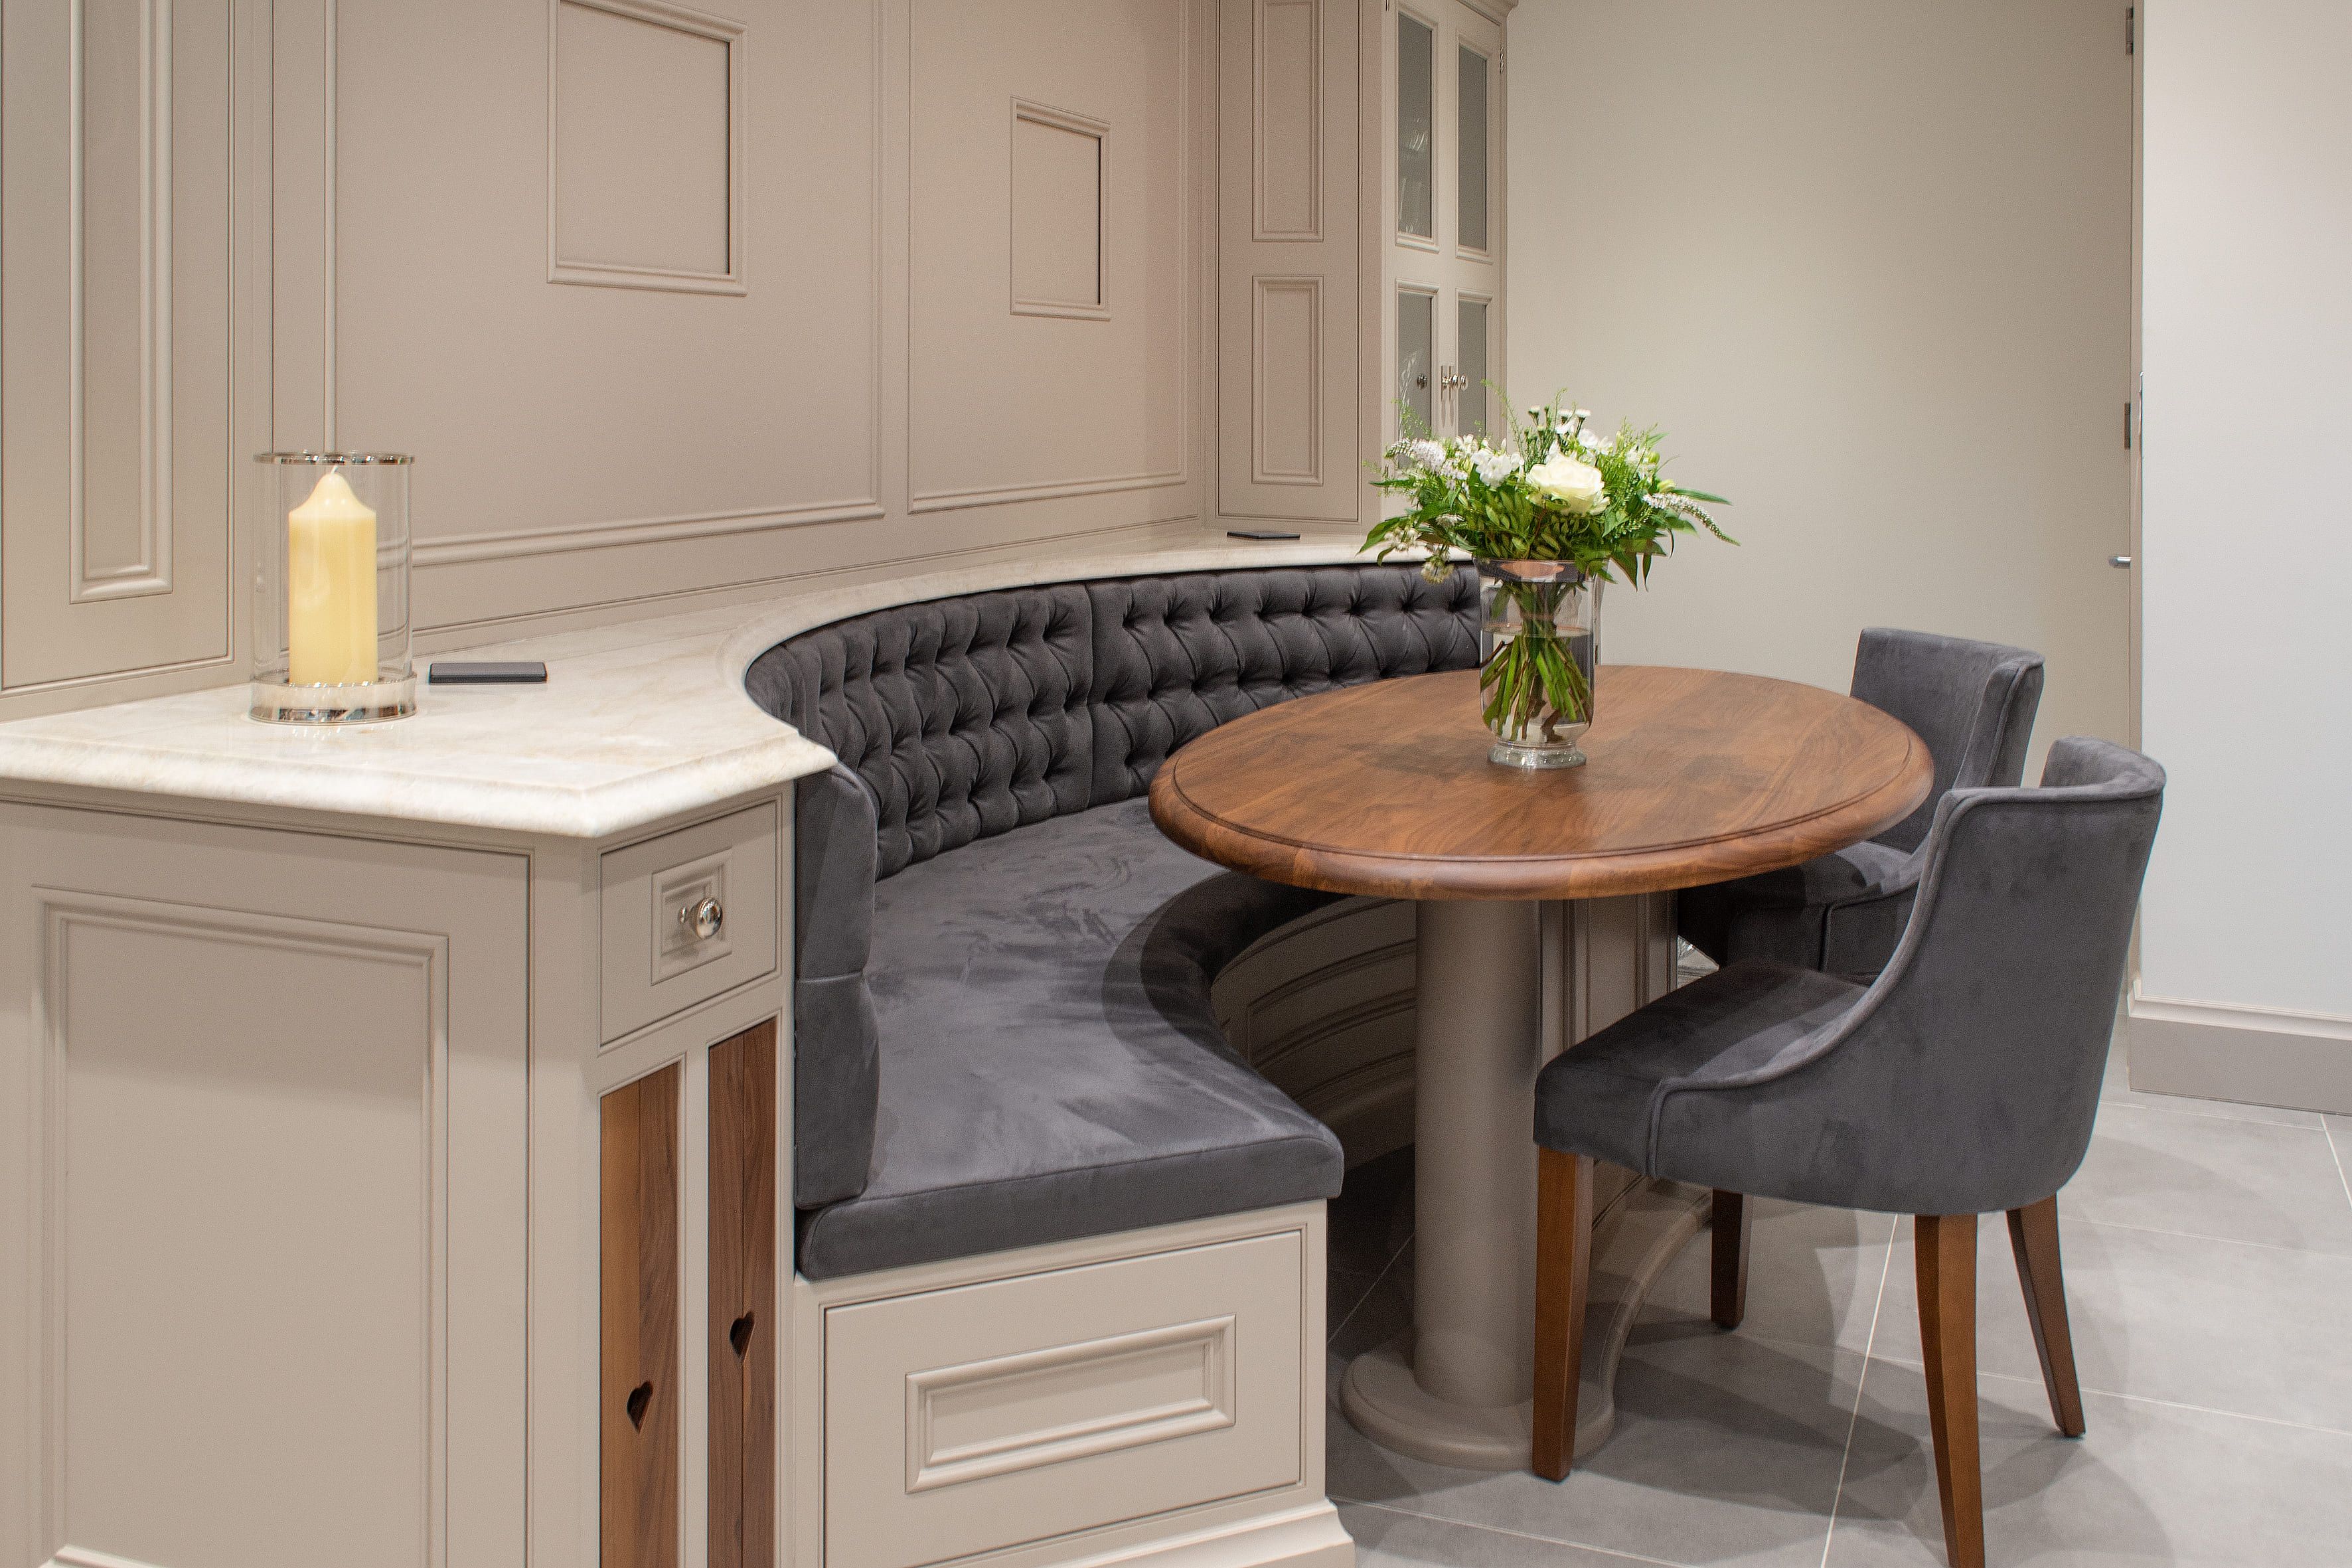 A cozy bespoke kitchen nook with a built-in bench upholstered in dark grey tufted fabric and two matching chairs. The round wooden table complements the bench and chairs. A vase with fresh flowers is placed at the centre of the table. 